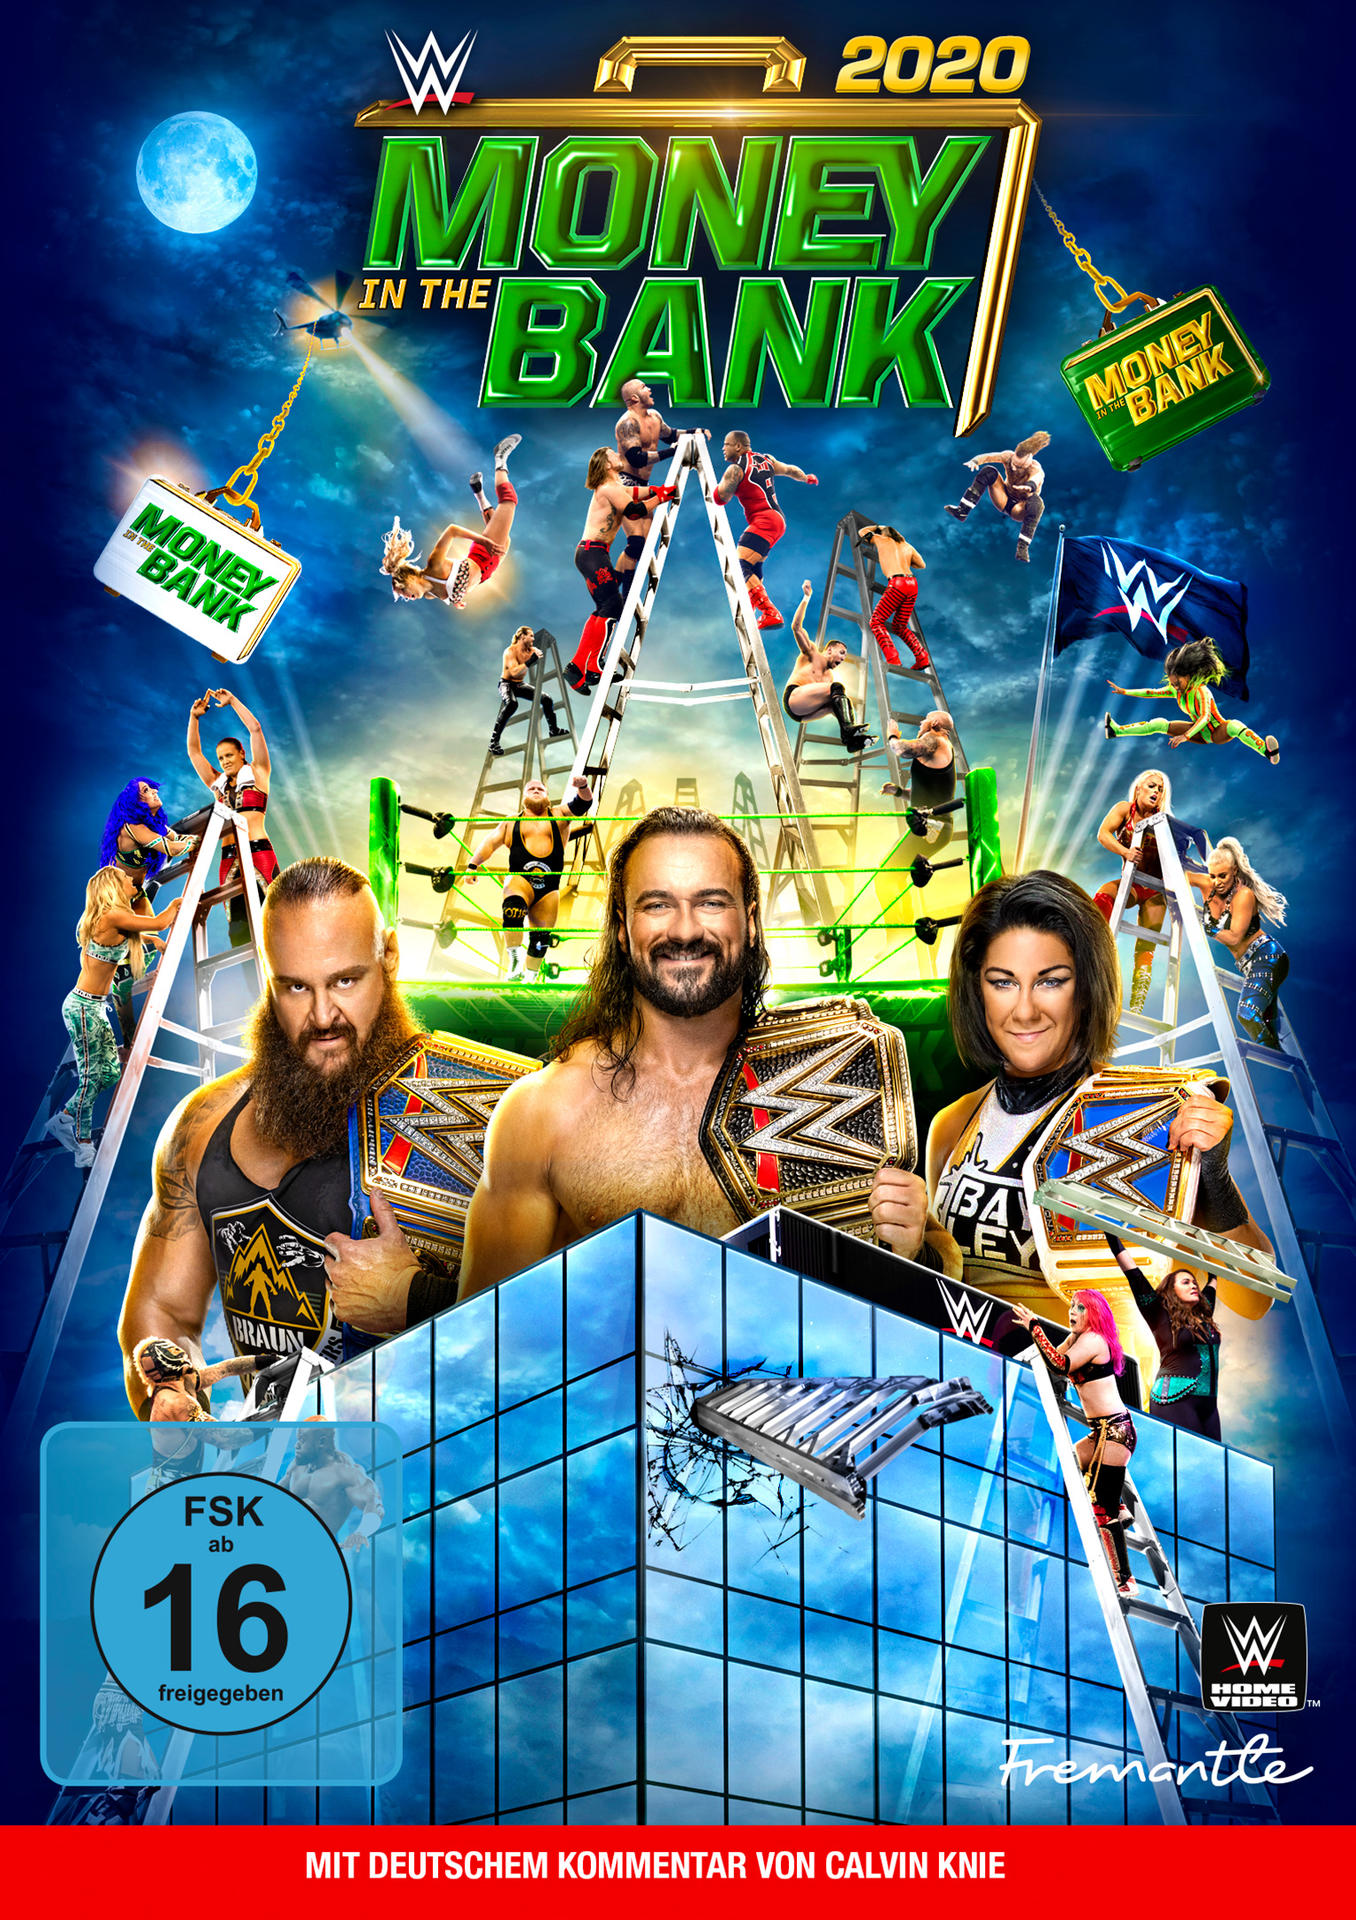 The 2020 In Money Bank DVD WWE: